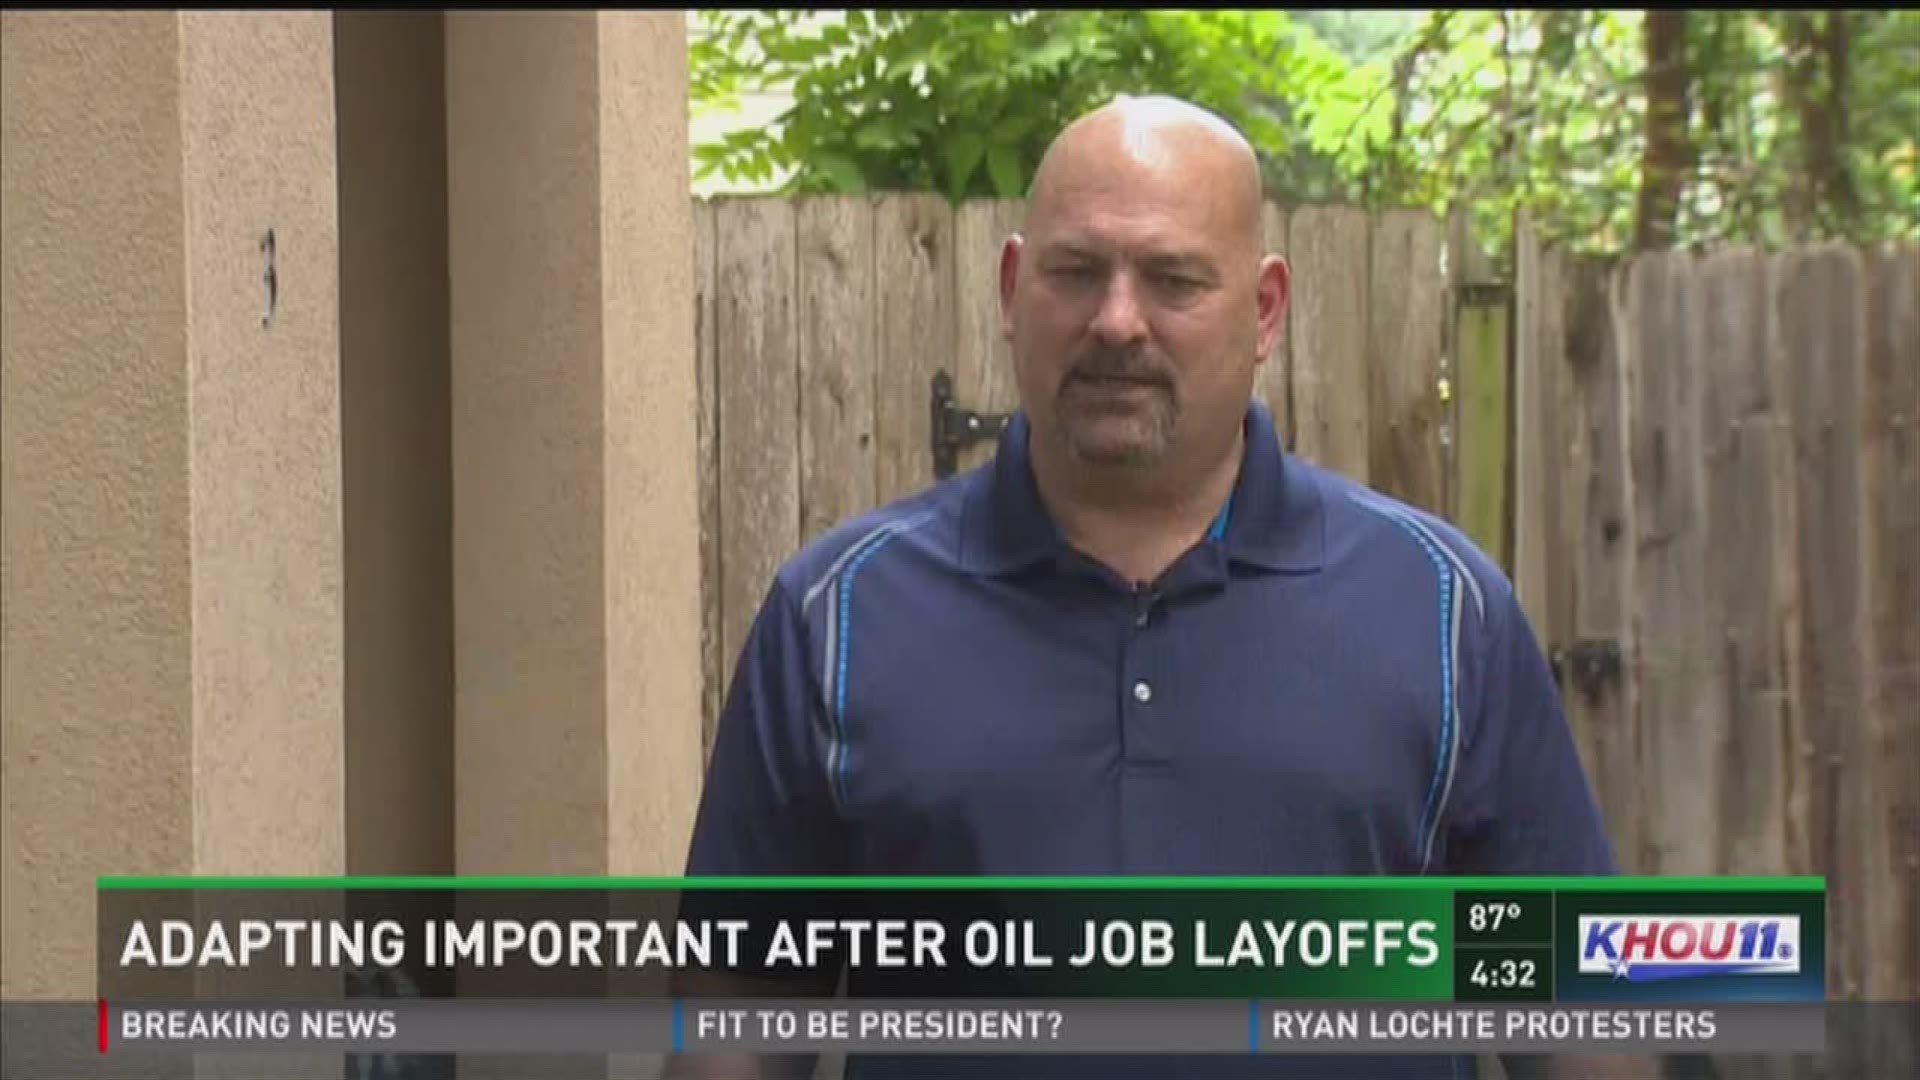 An oil industry executive who was laid off months ago is taking new measures to move on with his life.